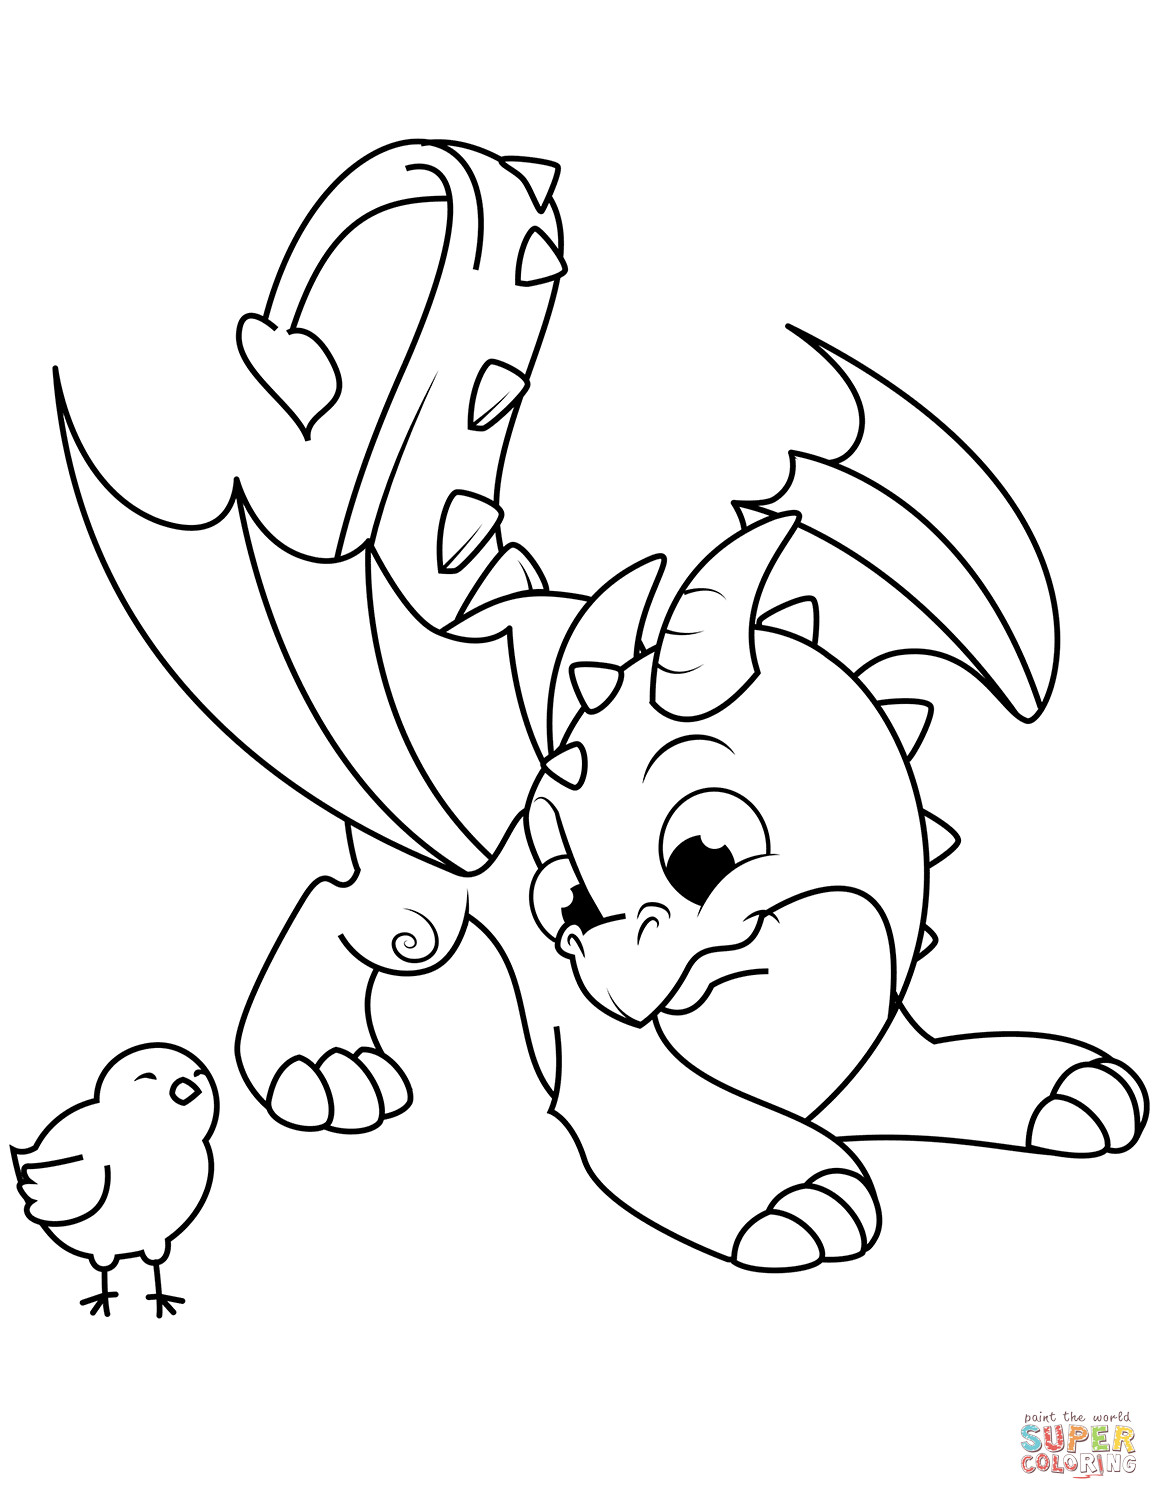 Cute Baby Dragon Coloring Pages
 Cute Dragon and Chick coloring page